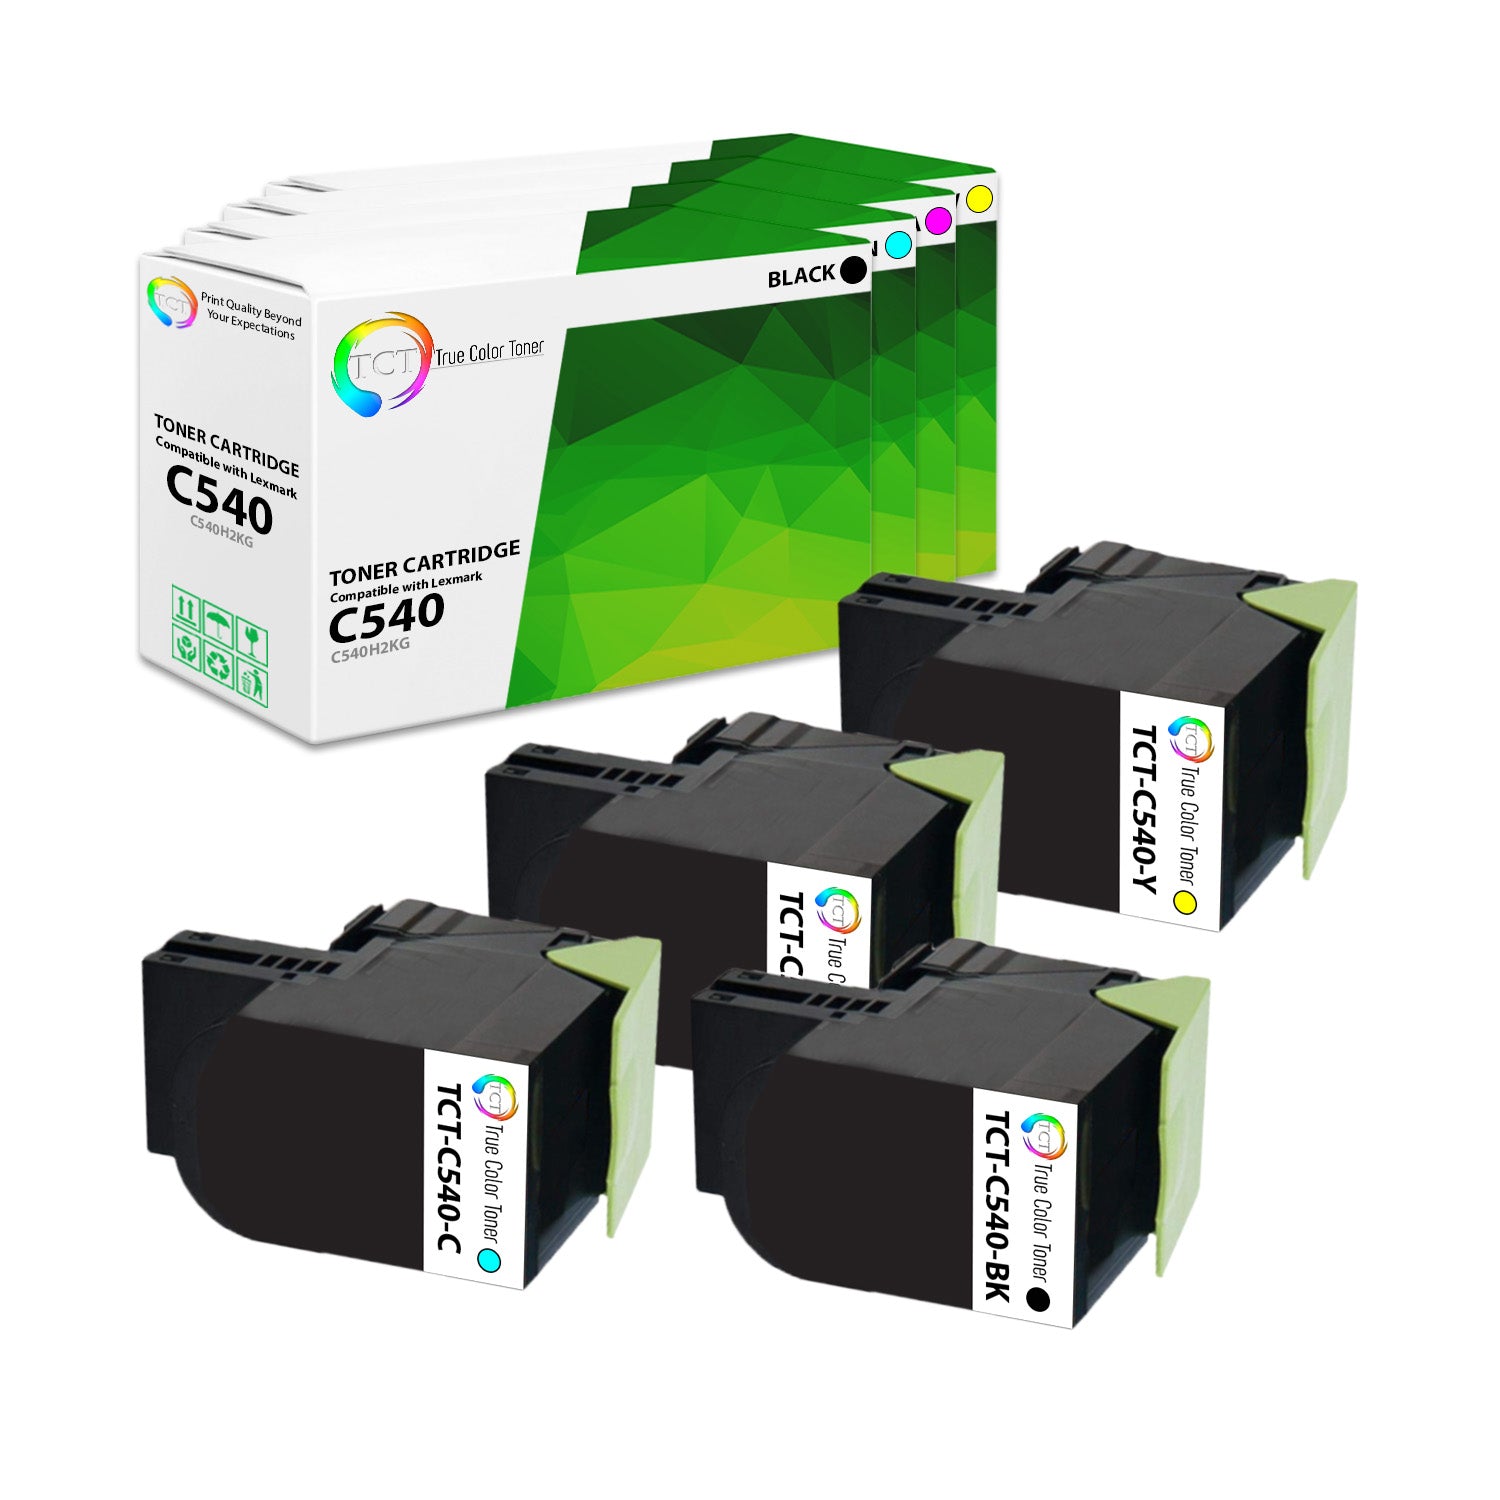 TCT Remanufactured Toner Cartridge Replacement for the Lexmark C540 Series - 4 Pack (BK, C, M, Y)